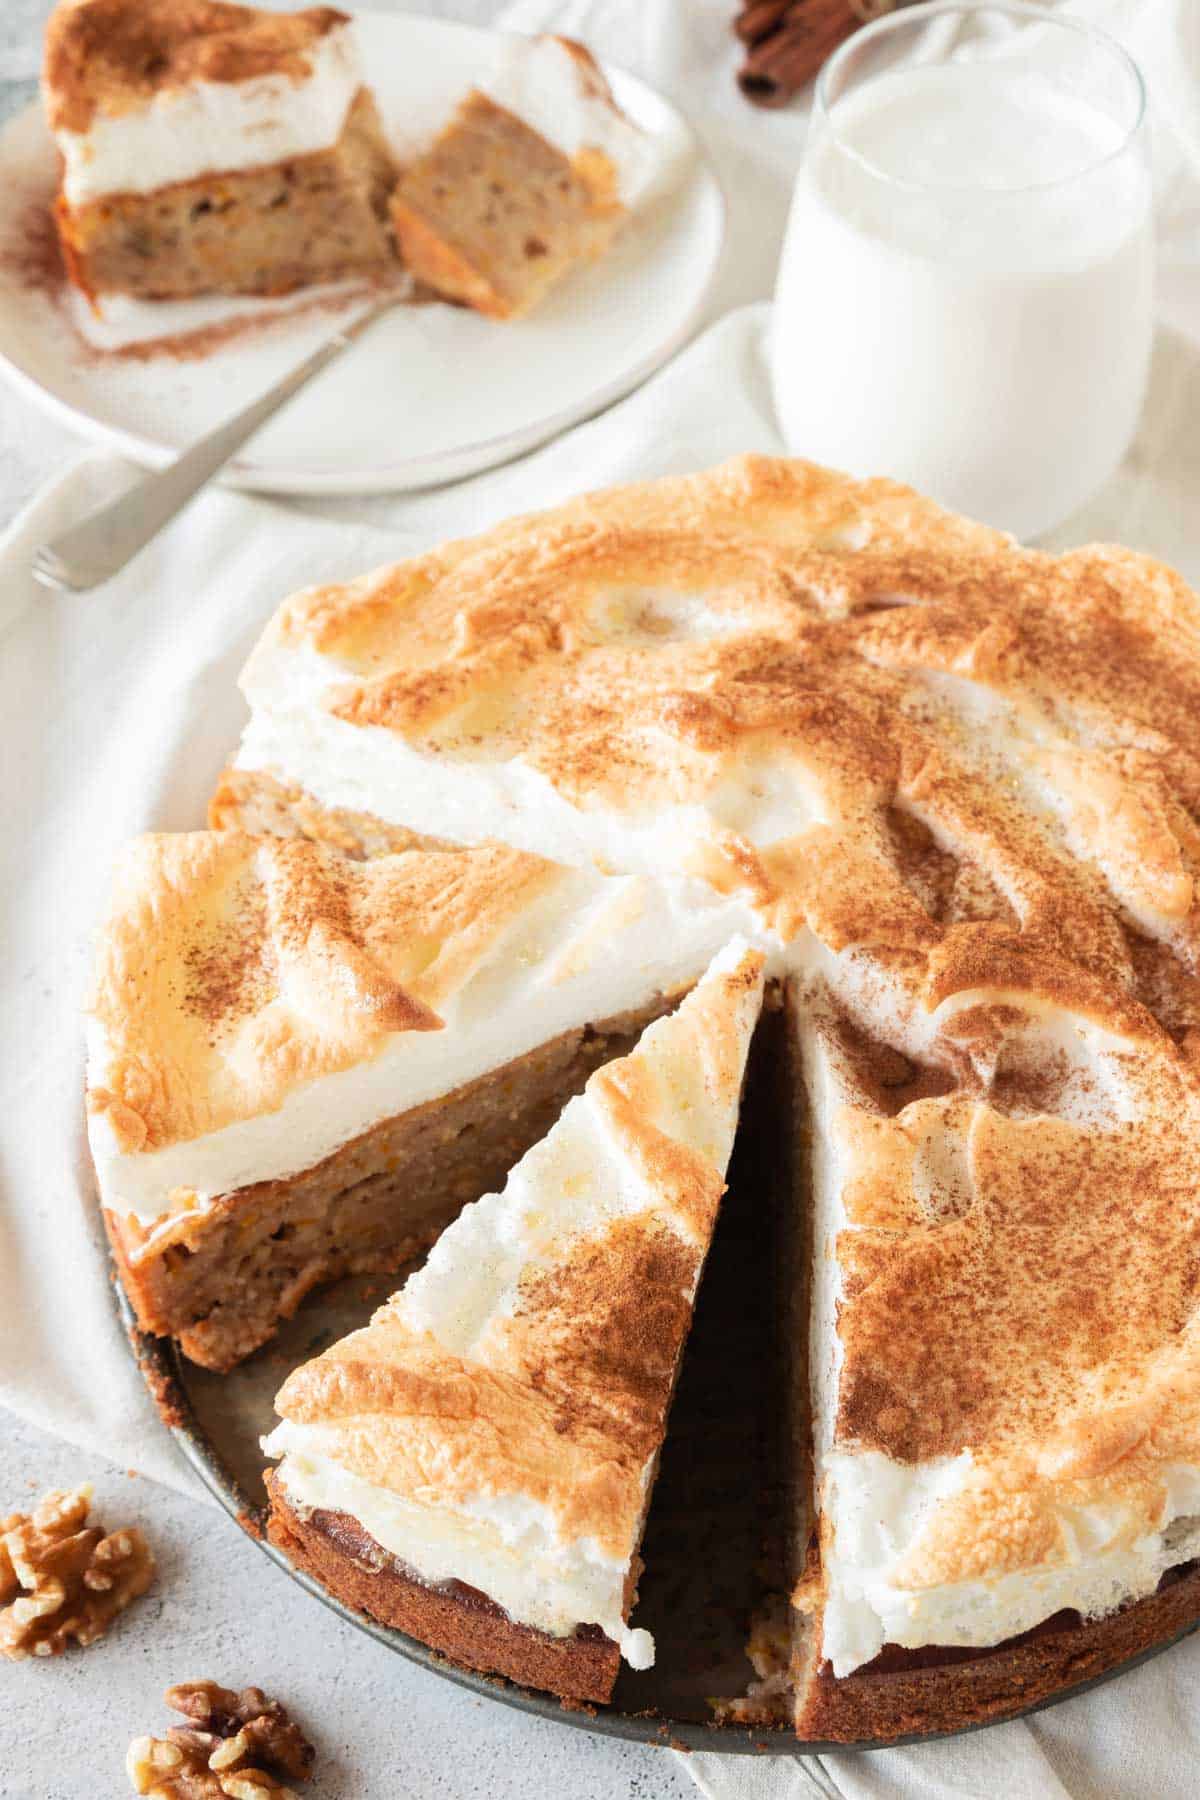 A pumpkin spiced coffee cake with one slice removed, topped with toasted meringue, served with a glass of milk on a light background.